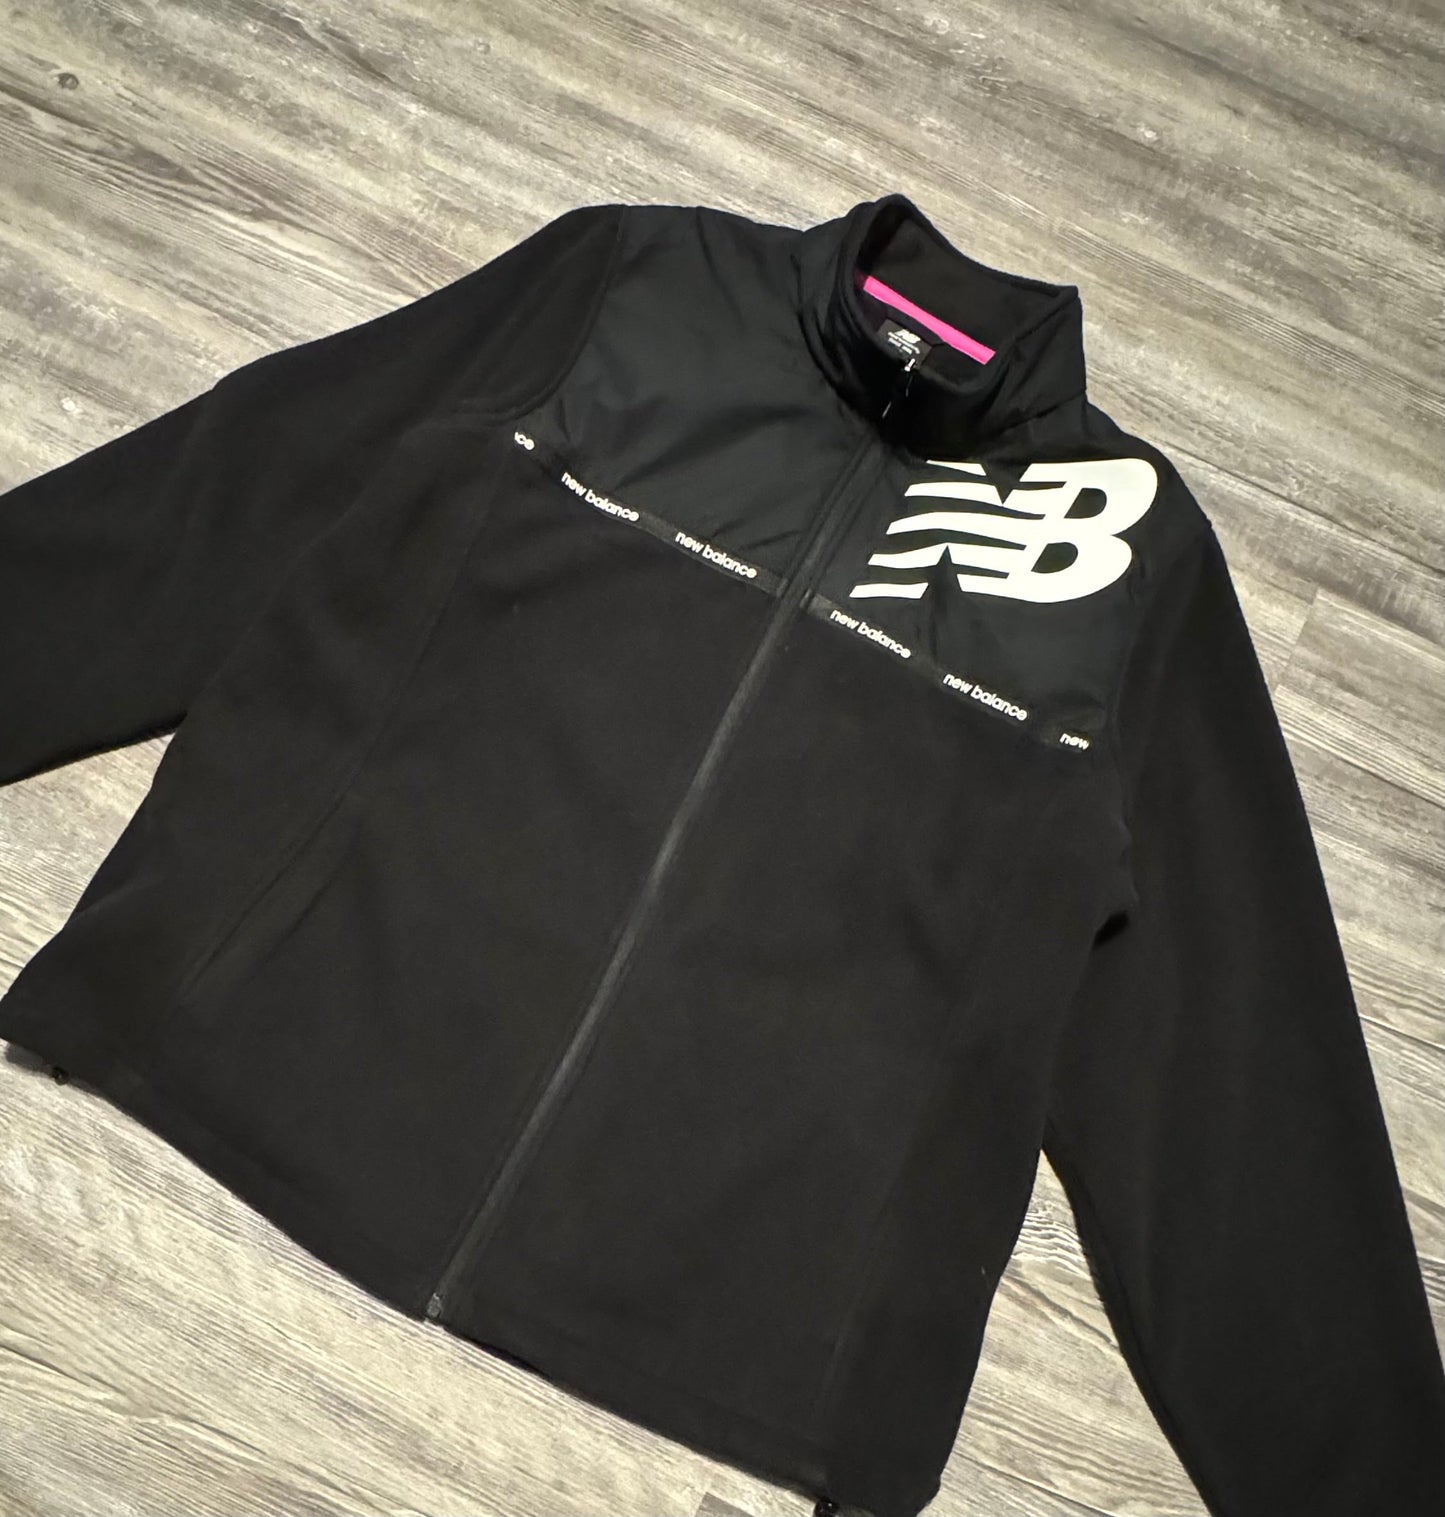 Jacket Other By New Balance  Size: 3x